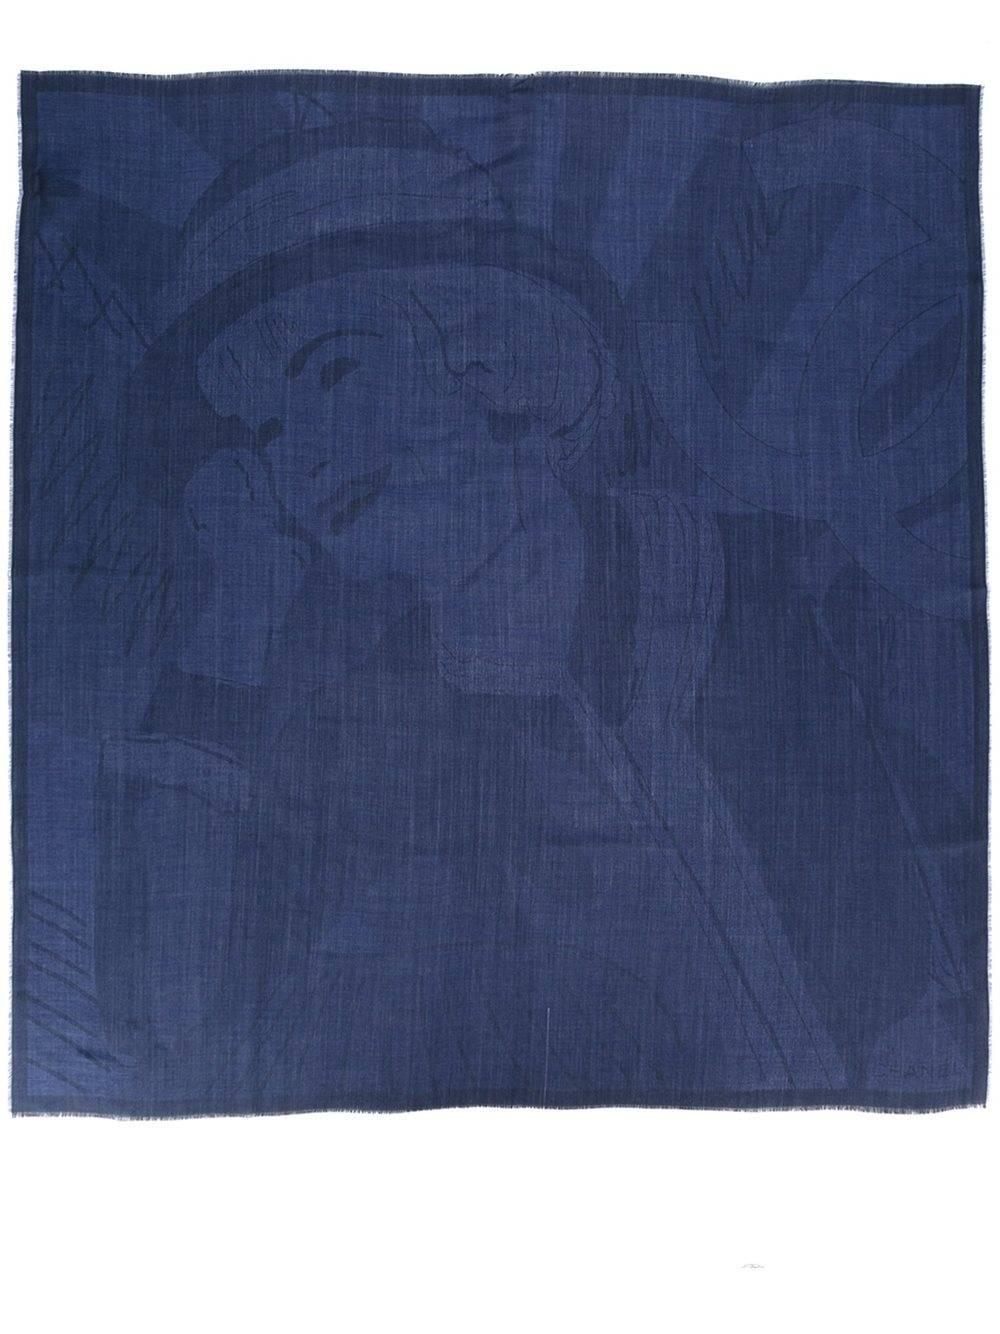 A never worn, vintage scarf from Chanel, spun from a blue silk-cashmere blend, and featuring a subtle pattern across its facade.

Colour: Navy

Materials: Silk 70%, cashmere 30%

Measurements: Length: 75cm, width: 75cm

Condition: 10/10 